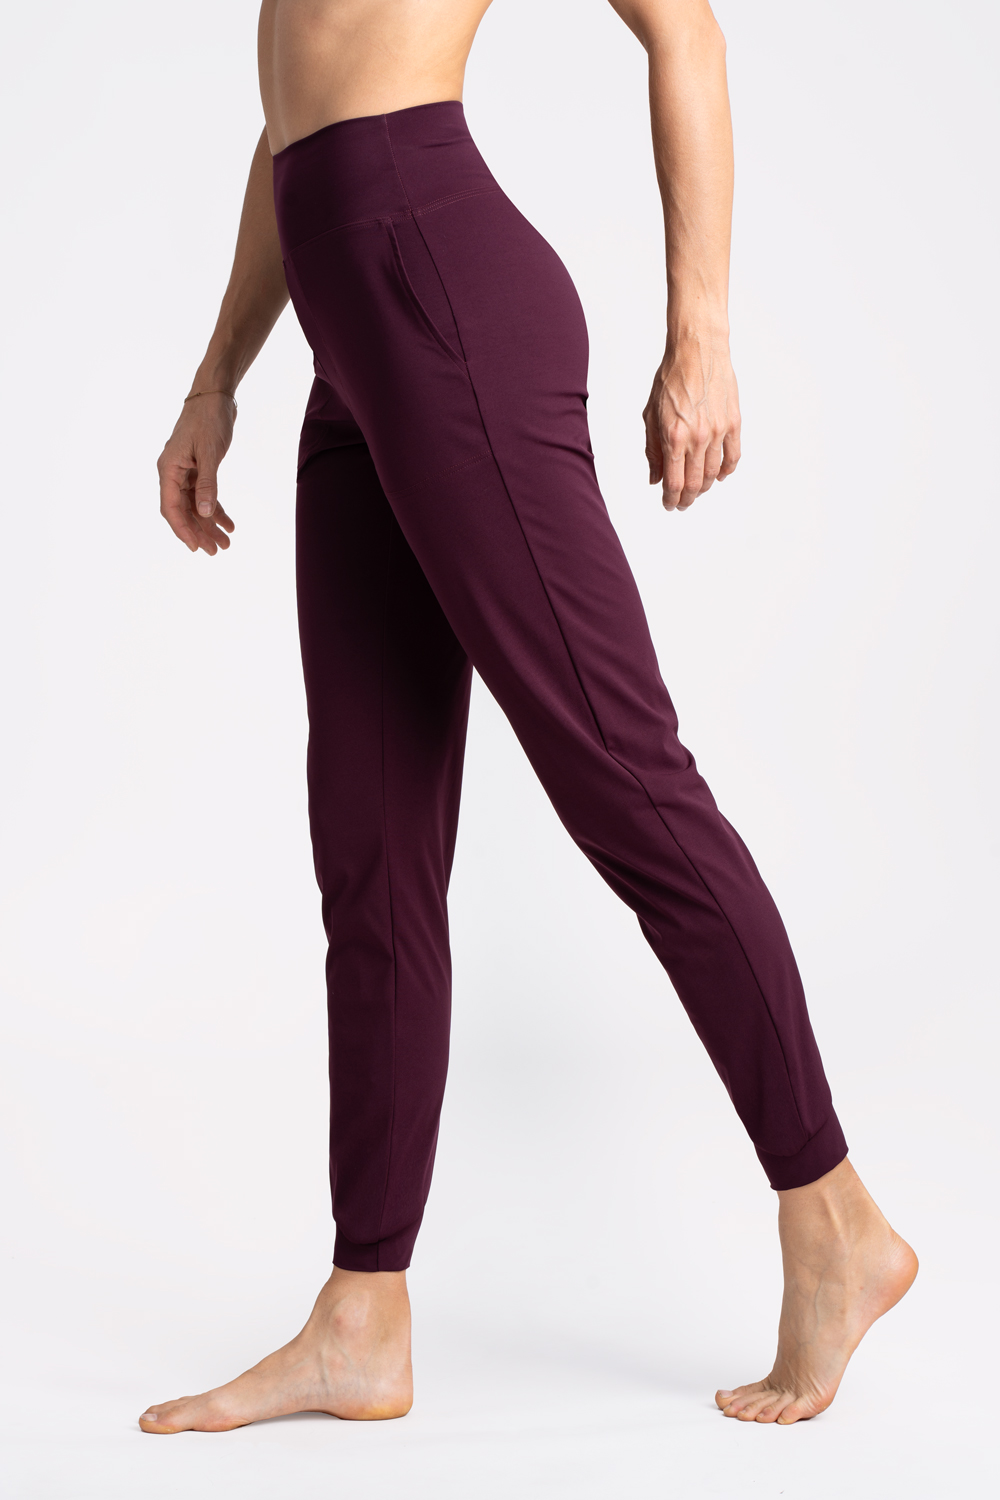 Pants – Athleisure Berry